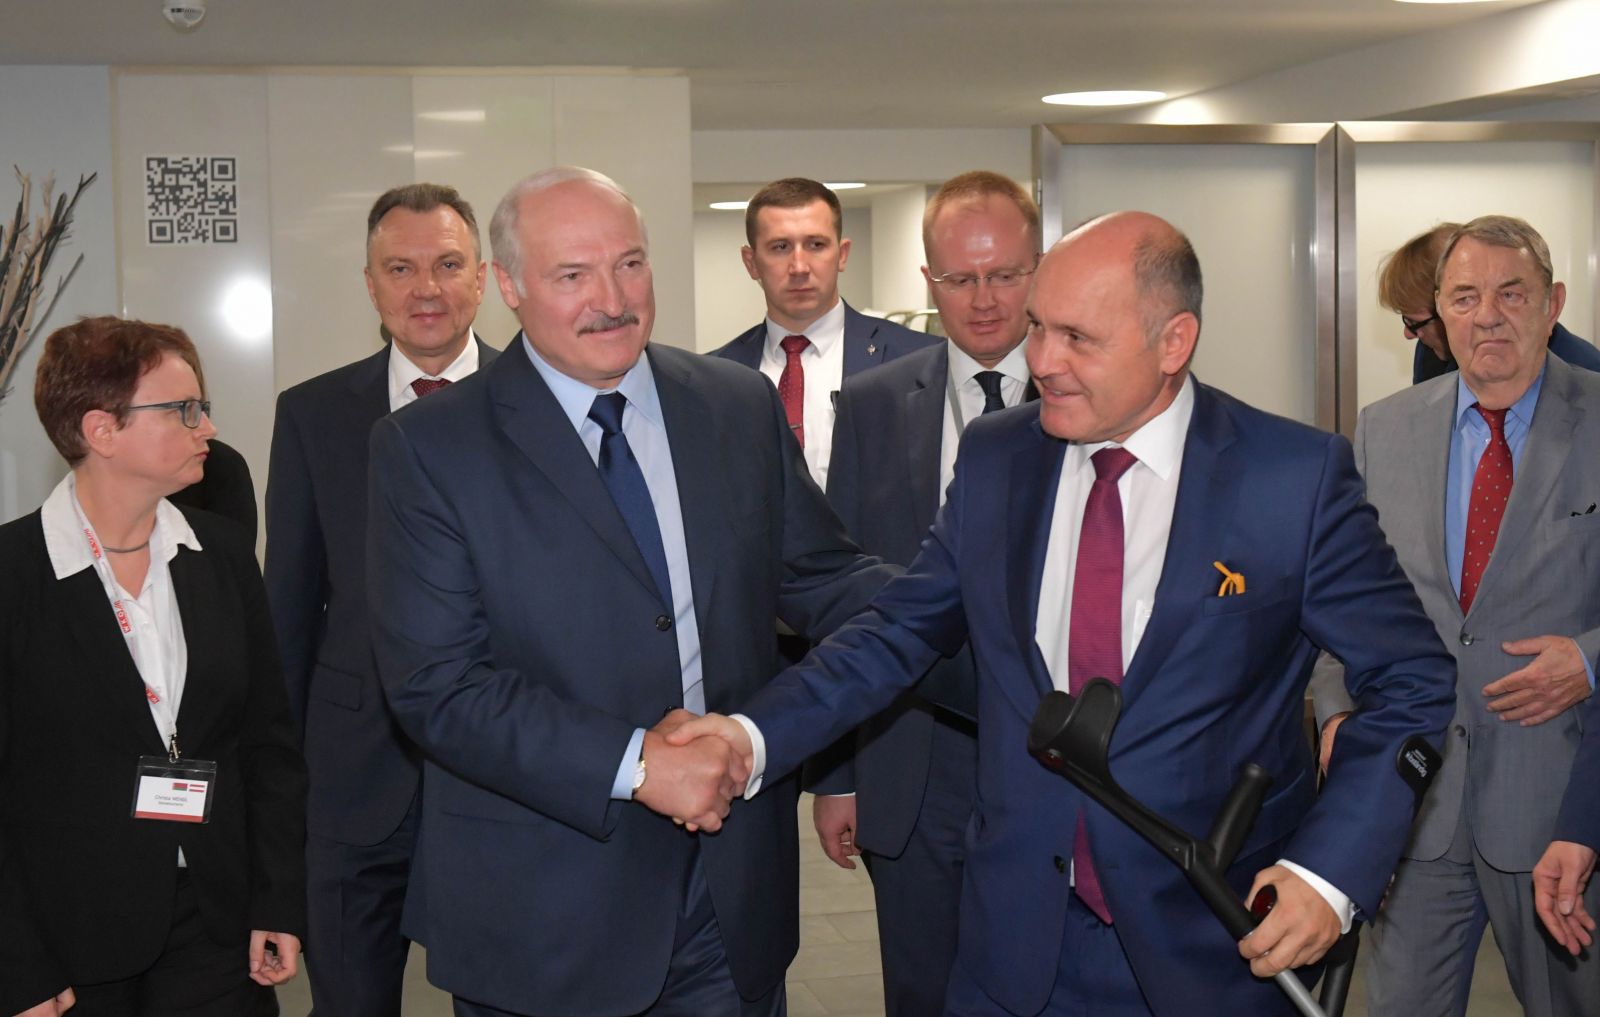 Austria-Belarus business forum with the participation of the President of the Republic of Belarus Aleksandr Lukashenko and the Chairman of the National Council of Austria W.Sobodka